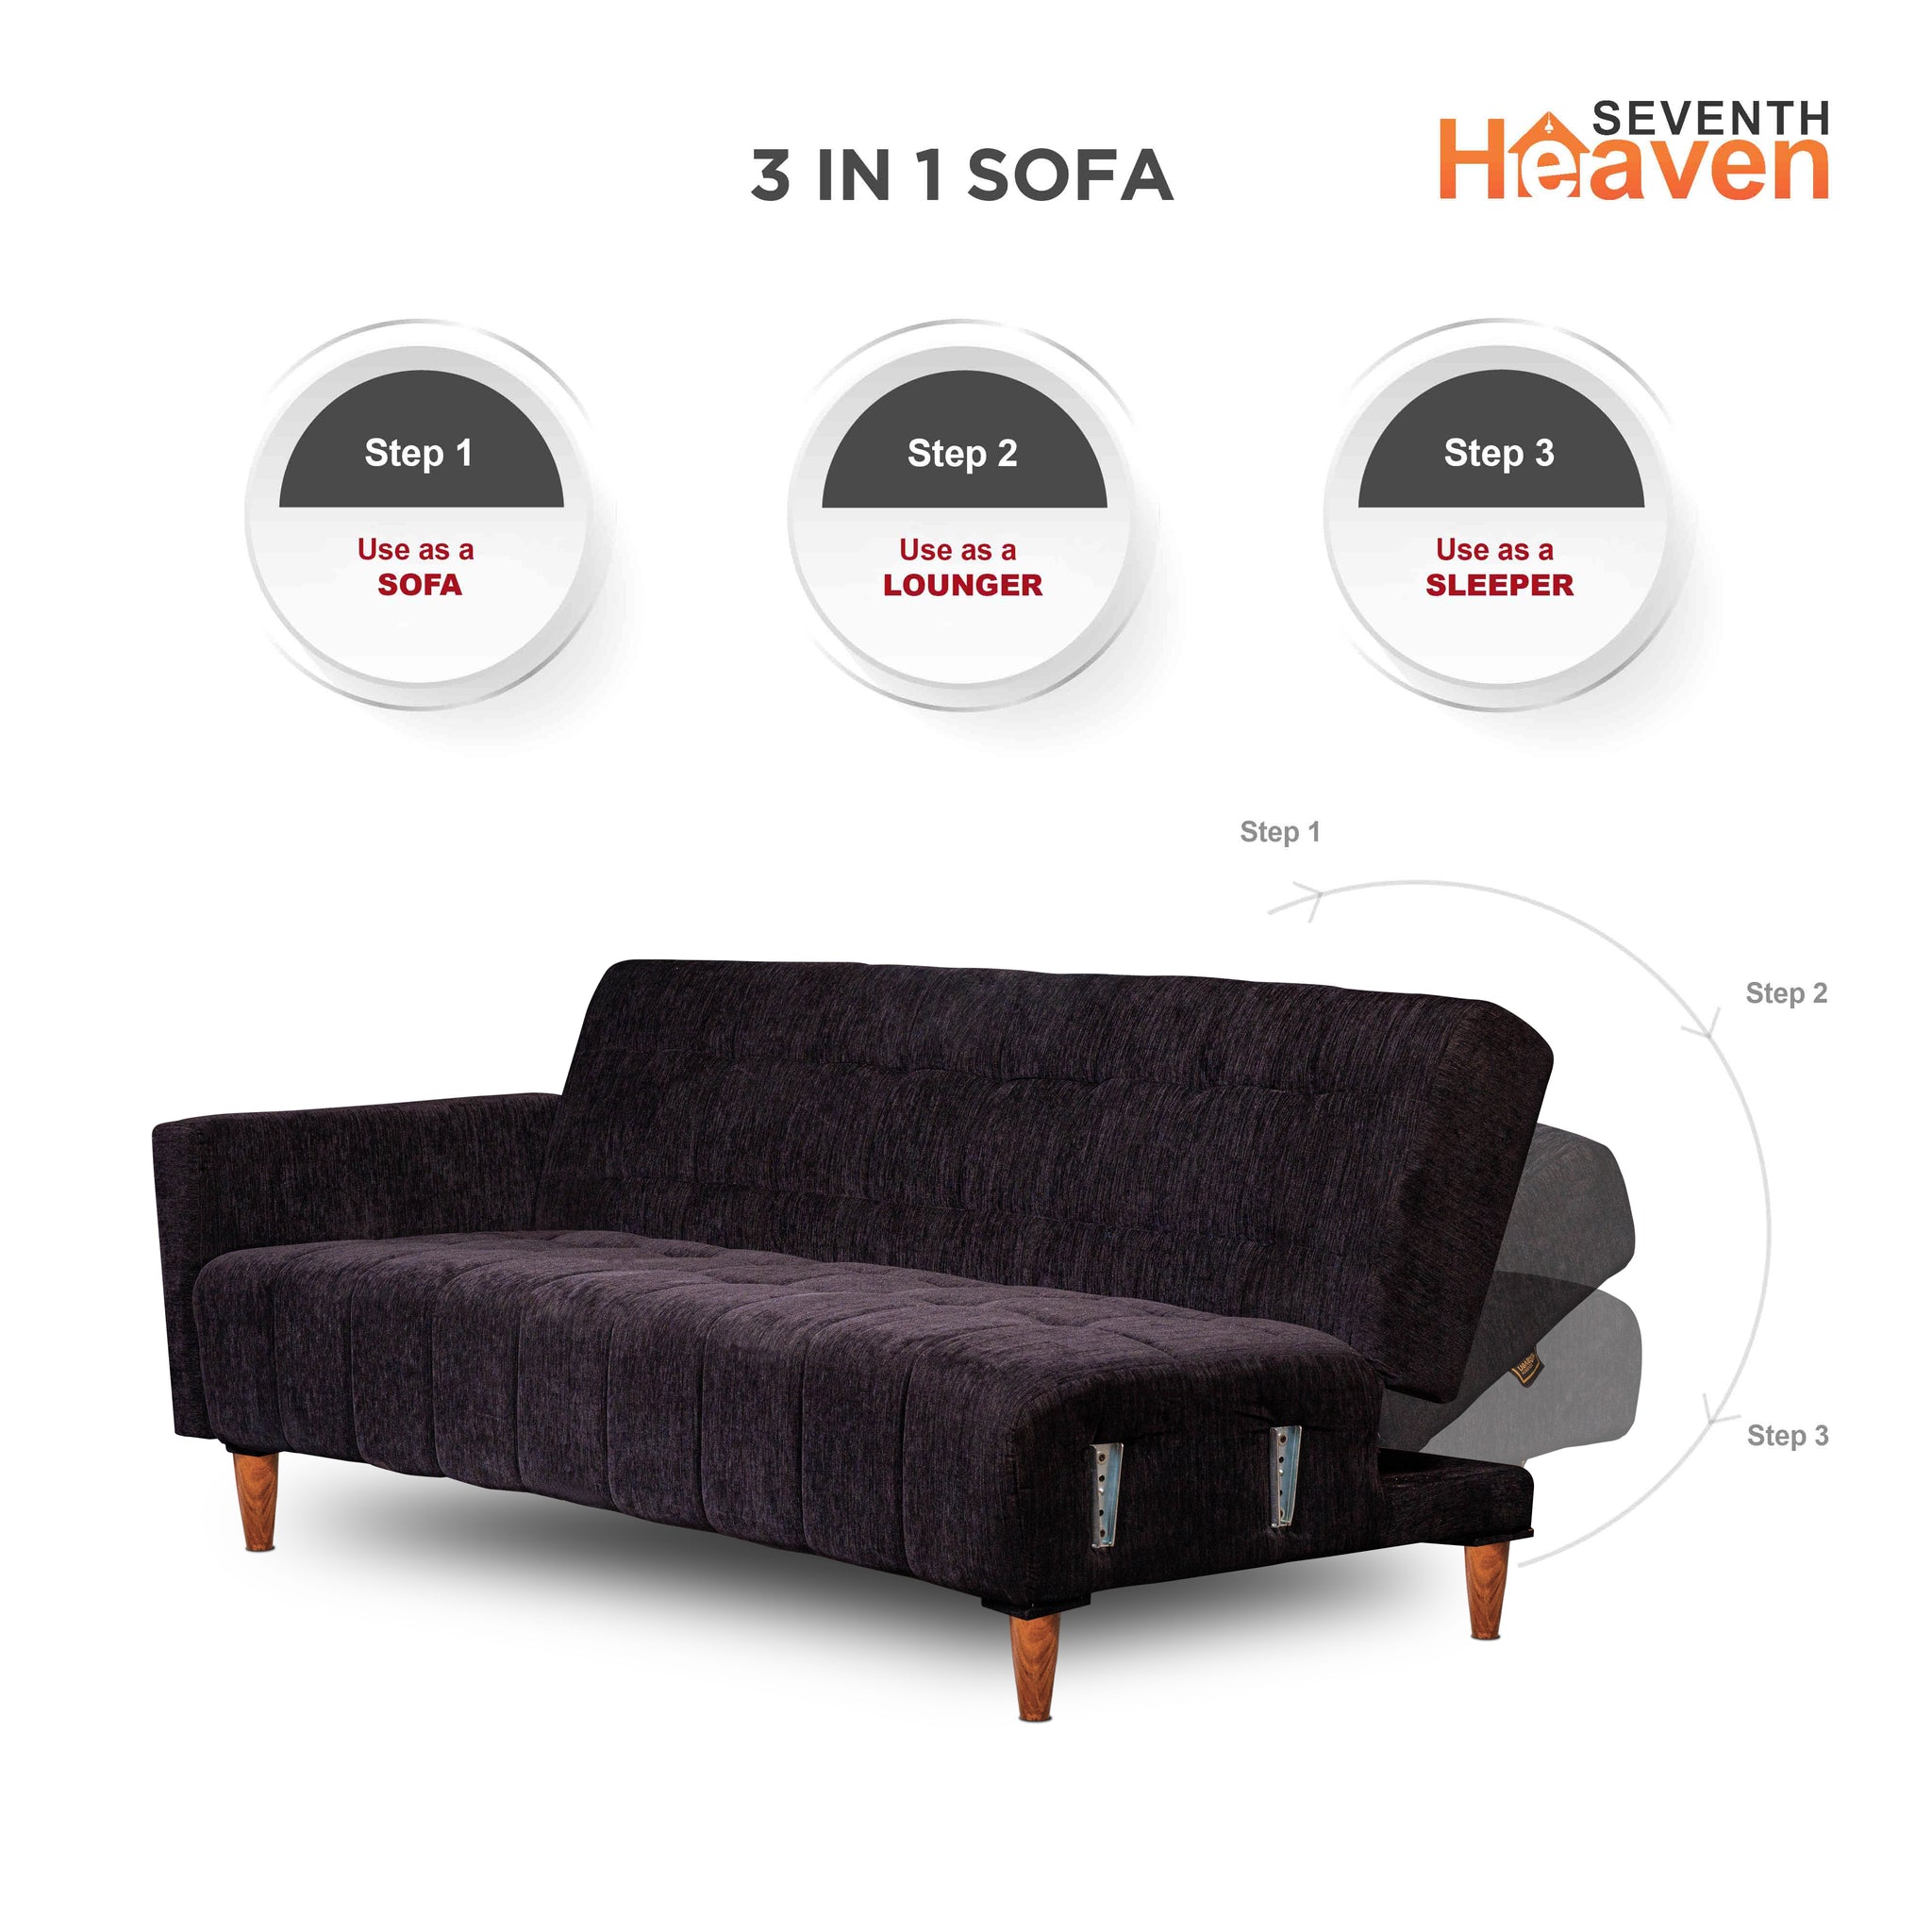 Seventh Heaven Lisbon 4 Seater Wooden Sofa Cum Bed with Armrest. Modern & Elegant Smart Furniture Range for luxurious homes, living rooms and offices. Use as a sofa, lounger or bed with removable armrest. Perfect for guests. Molphino fabric with sheesham polished wooden legs. Black colour.